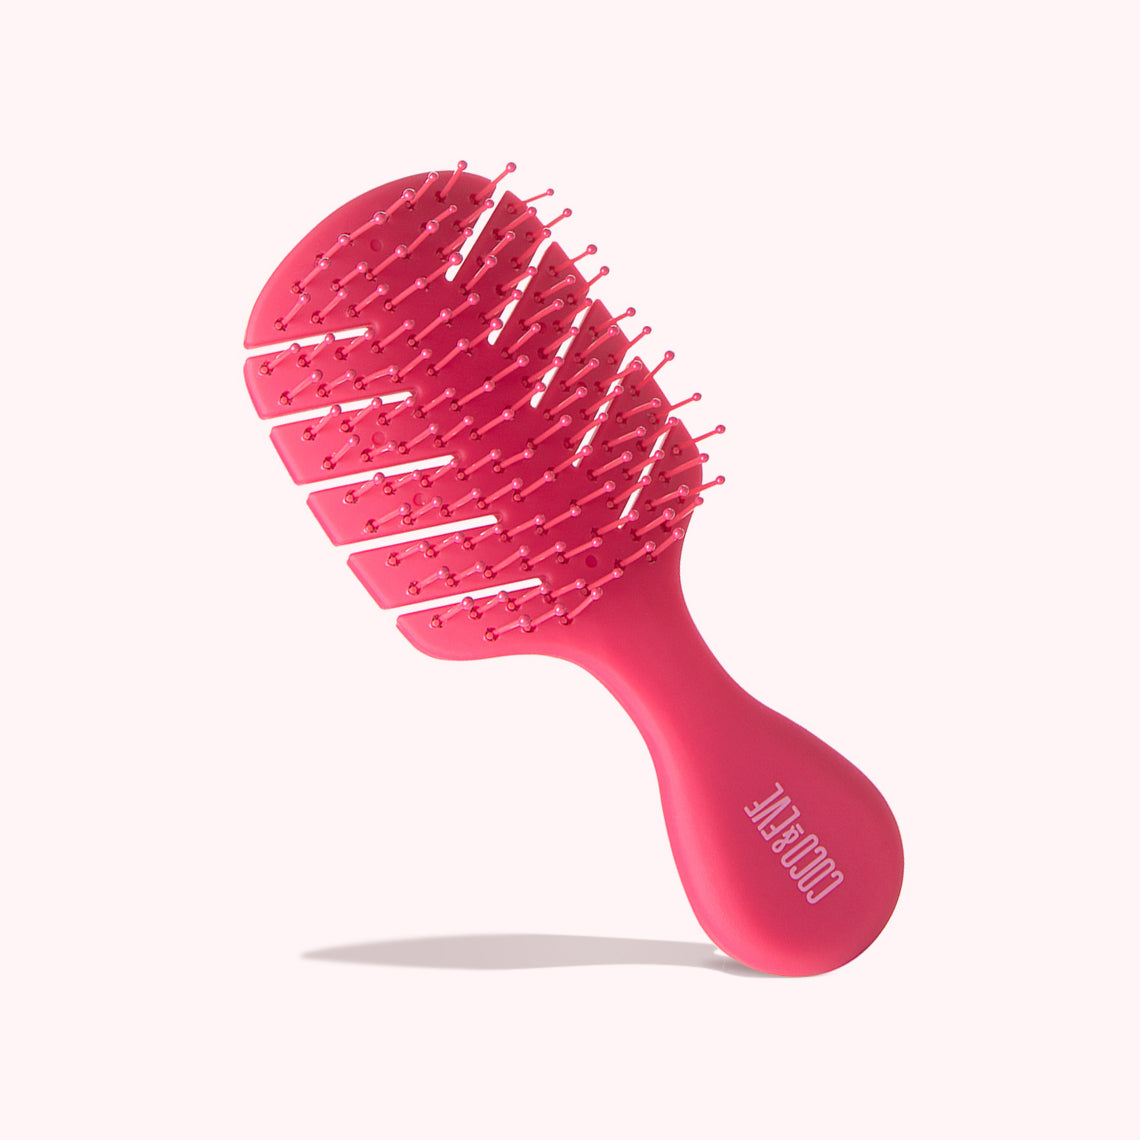 GEM Pink Hot Air Blowout Brush Dry Style & Add Volume with 3